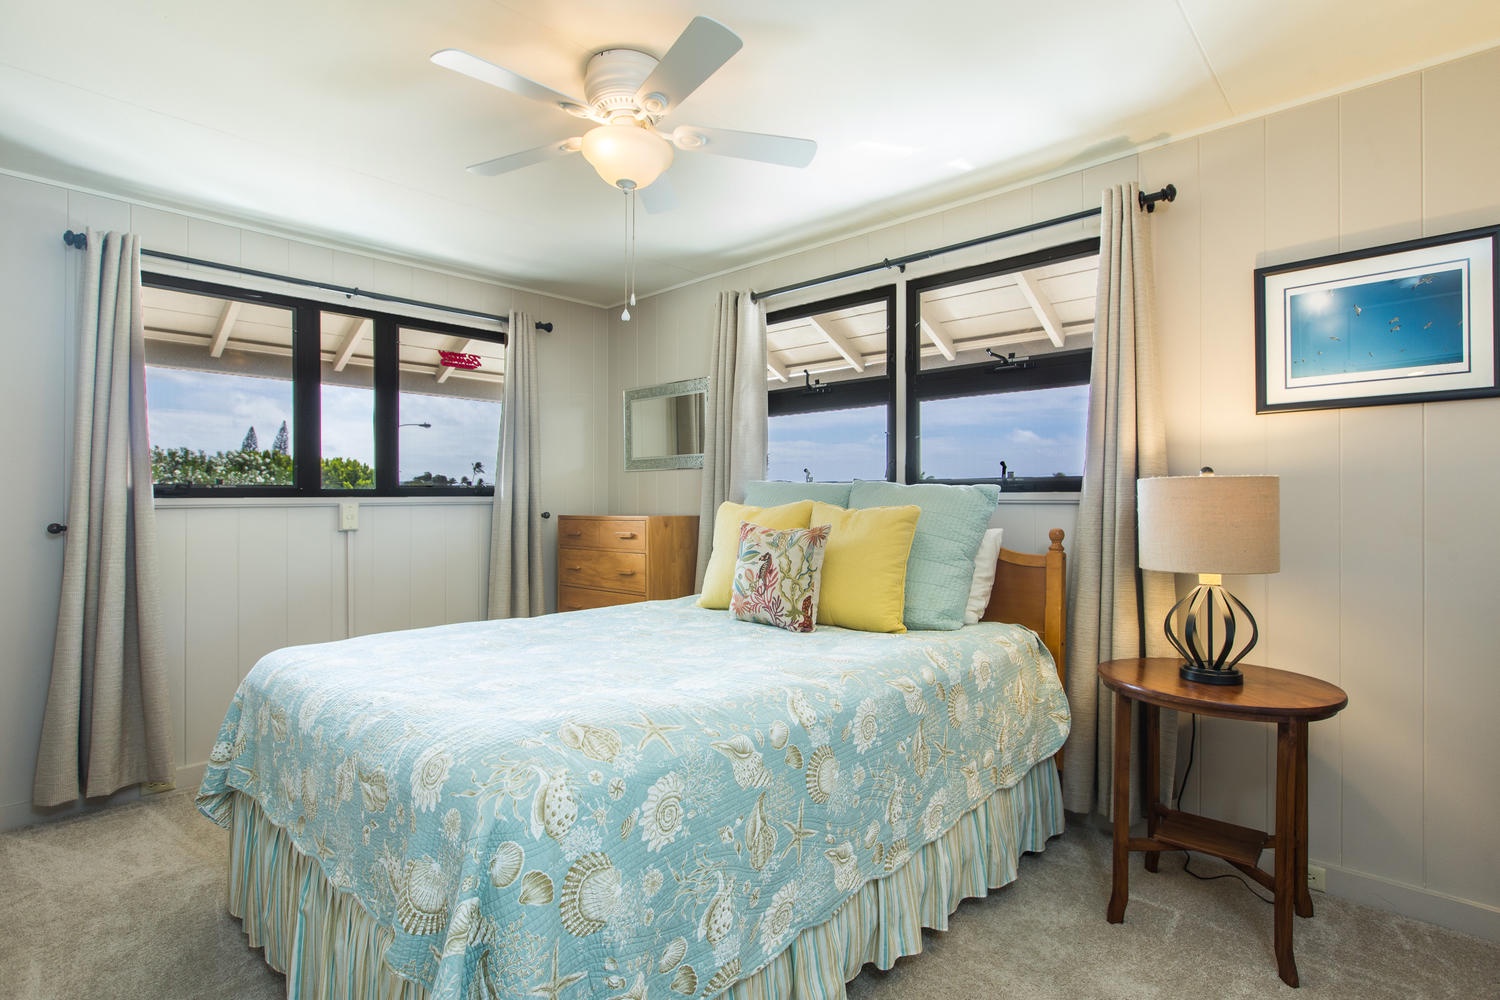 Honolulu Vacation Rentals, Hale Poola - Bedroom two, with queen bed and shared bath.